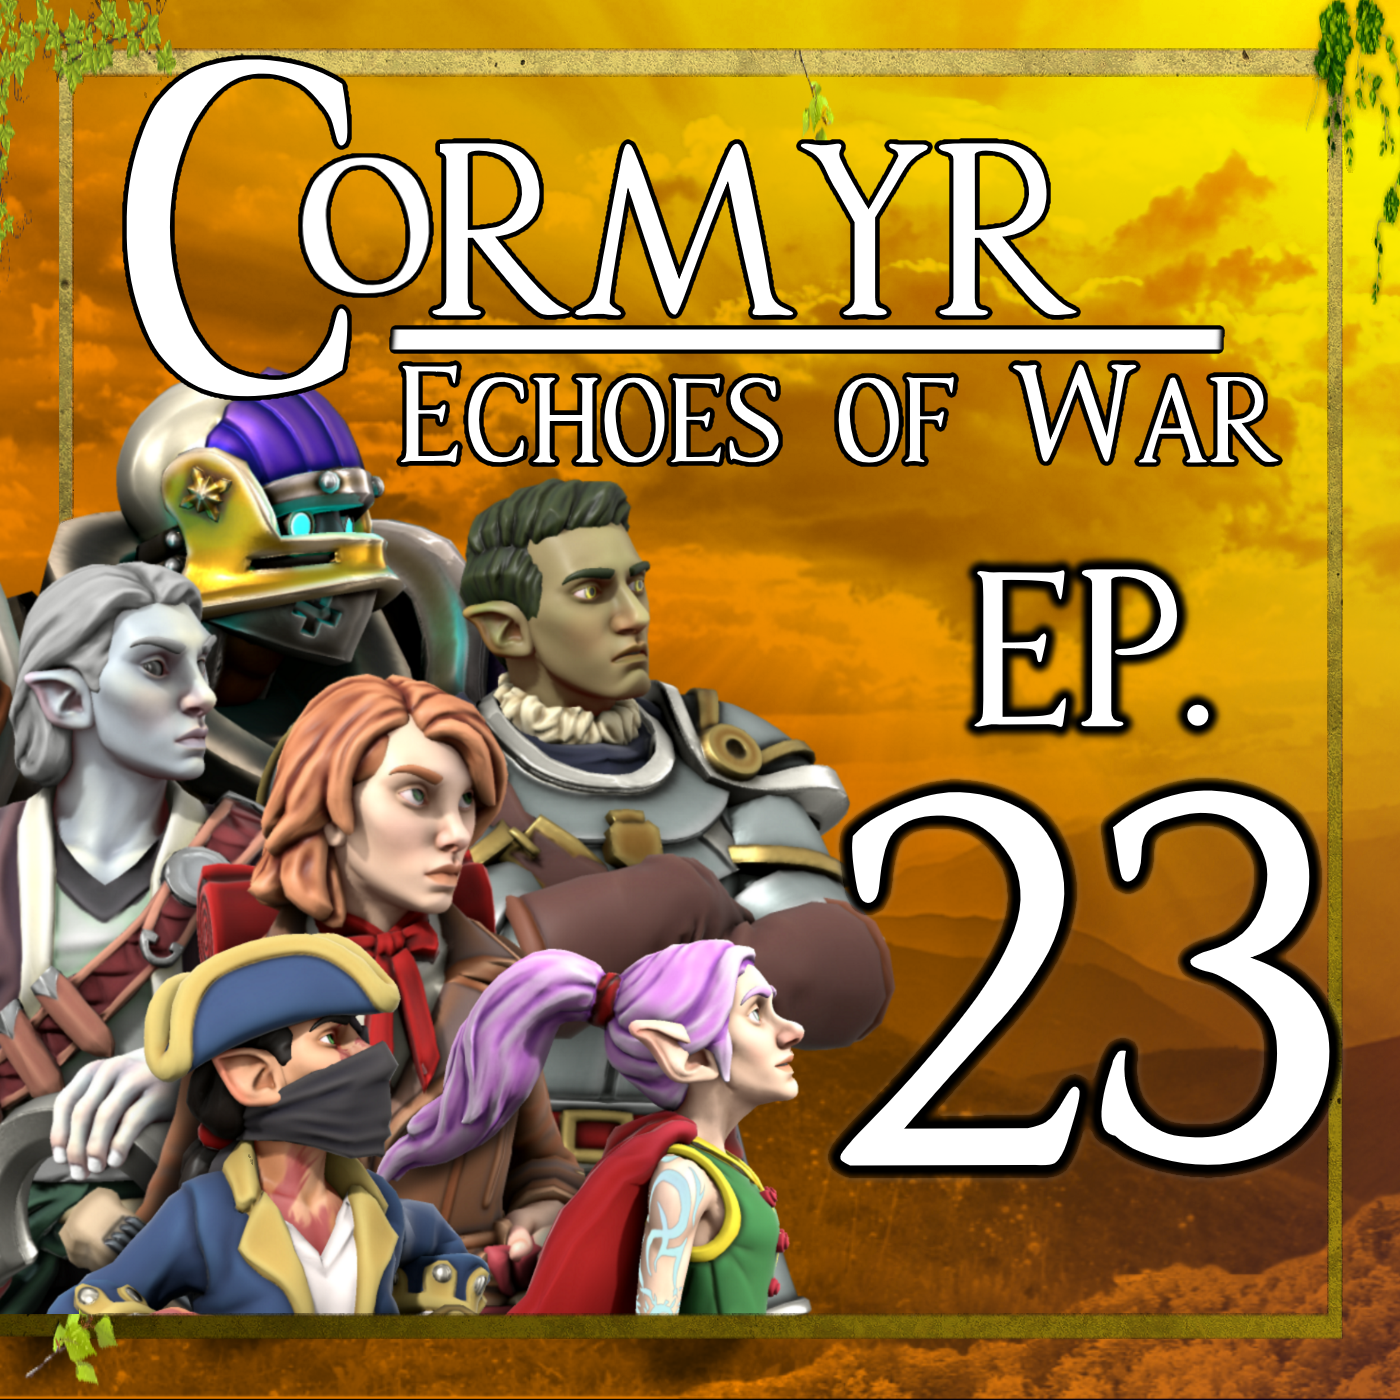 Cormyr: Echoes of War - Ep. 23 - Blast From The Past